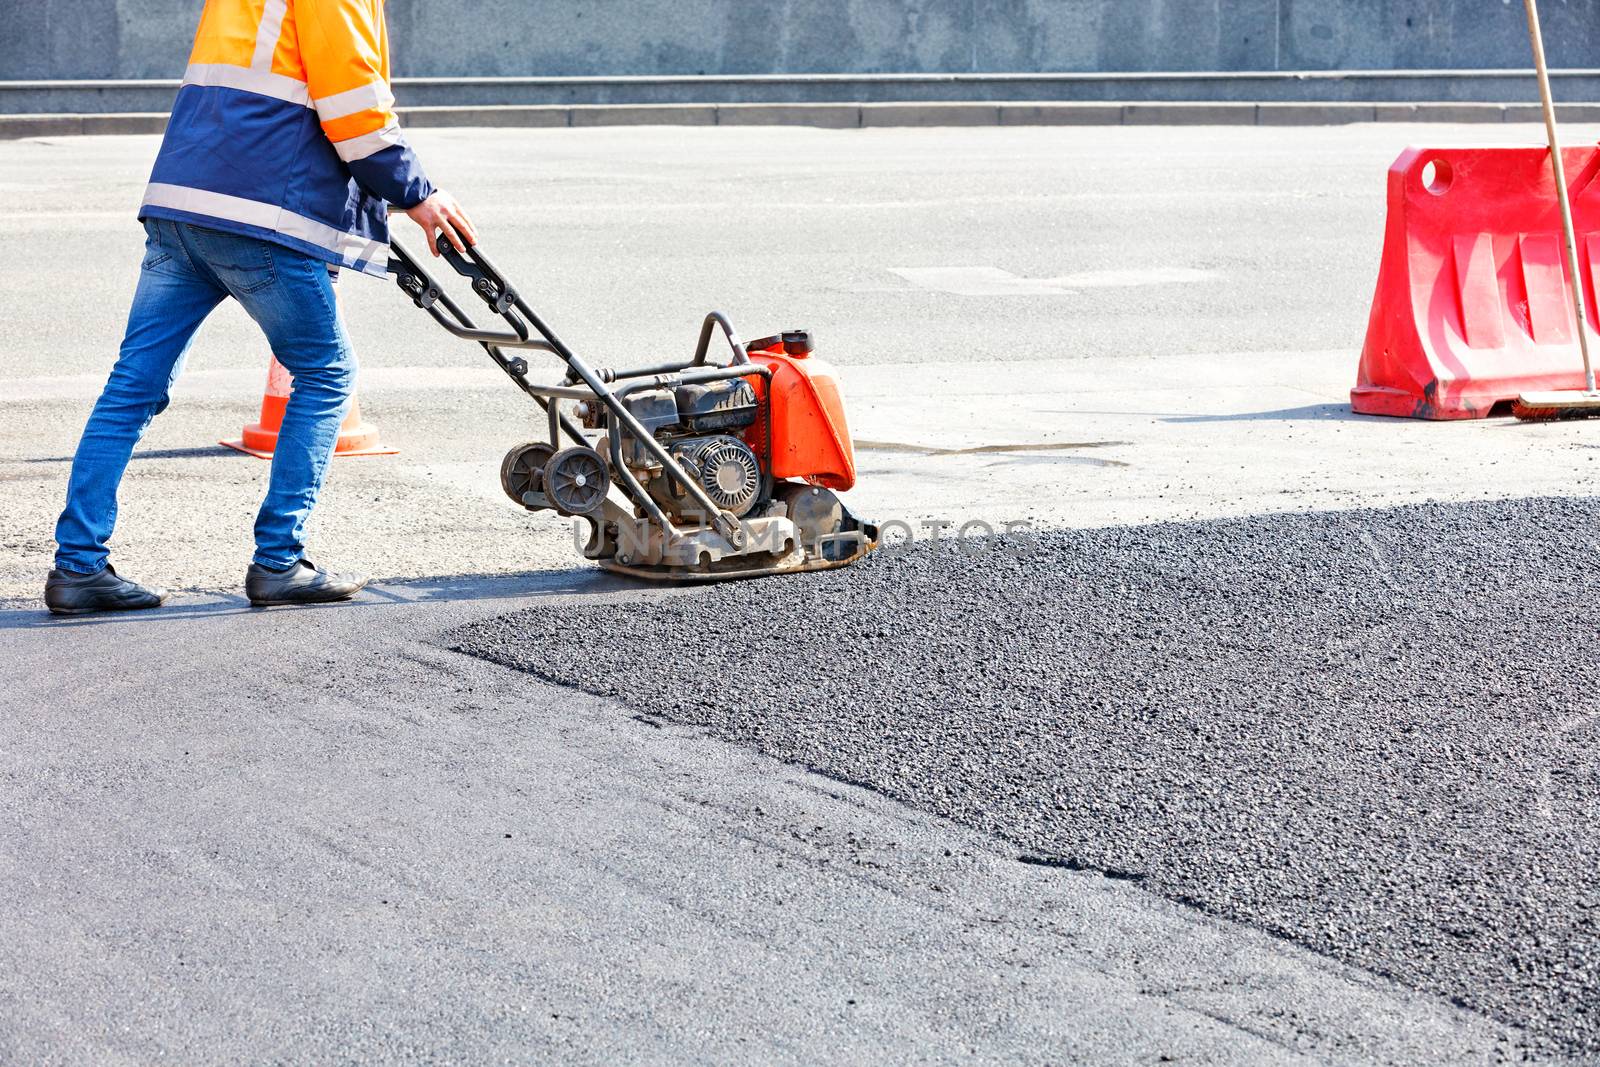 Worker road service use vibratory plate compactor compacting asphalt at road repair site.